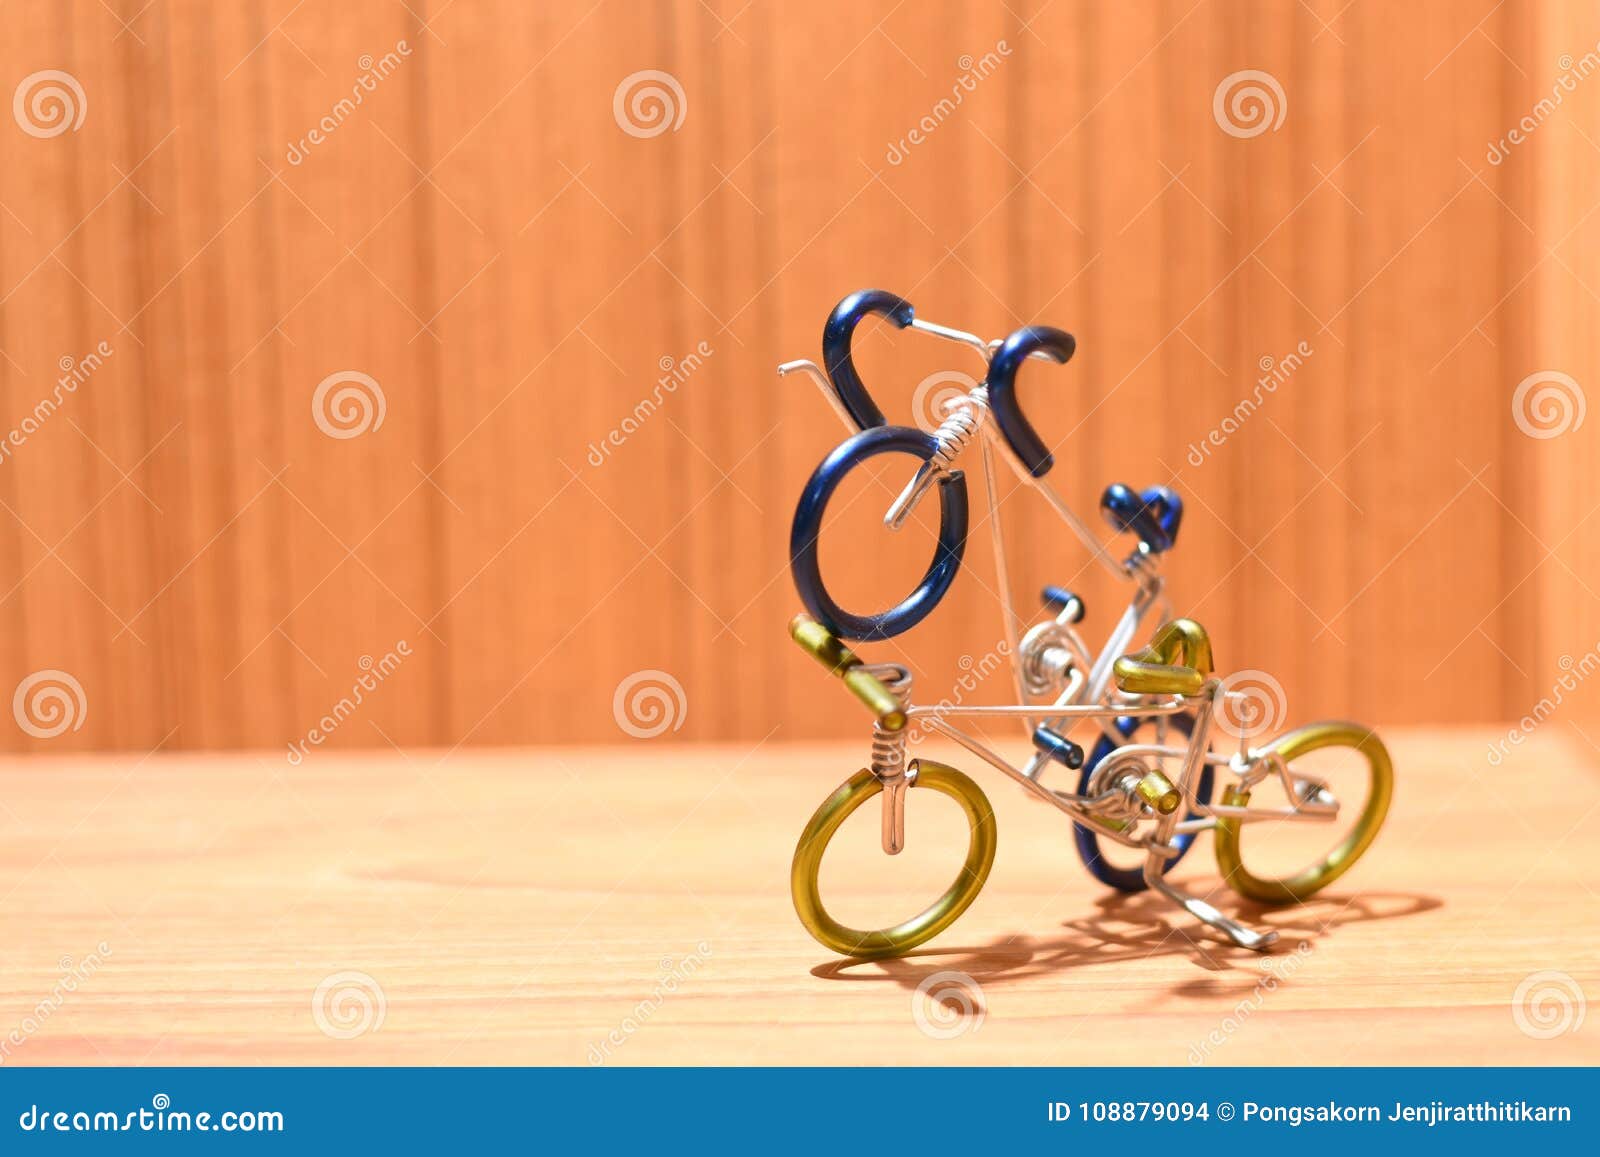 Bicycle Models And Text Areas Stock Photo Image Of Pedal Mini